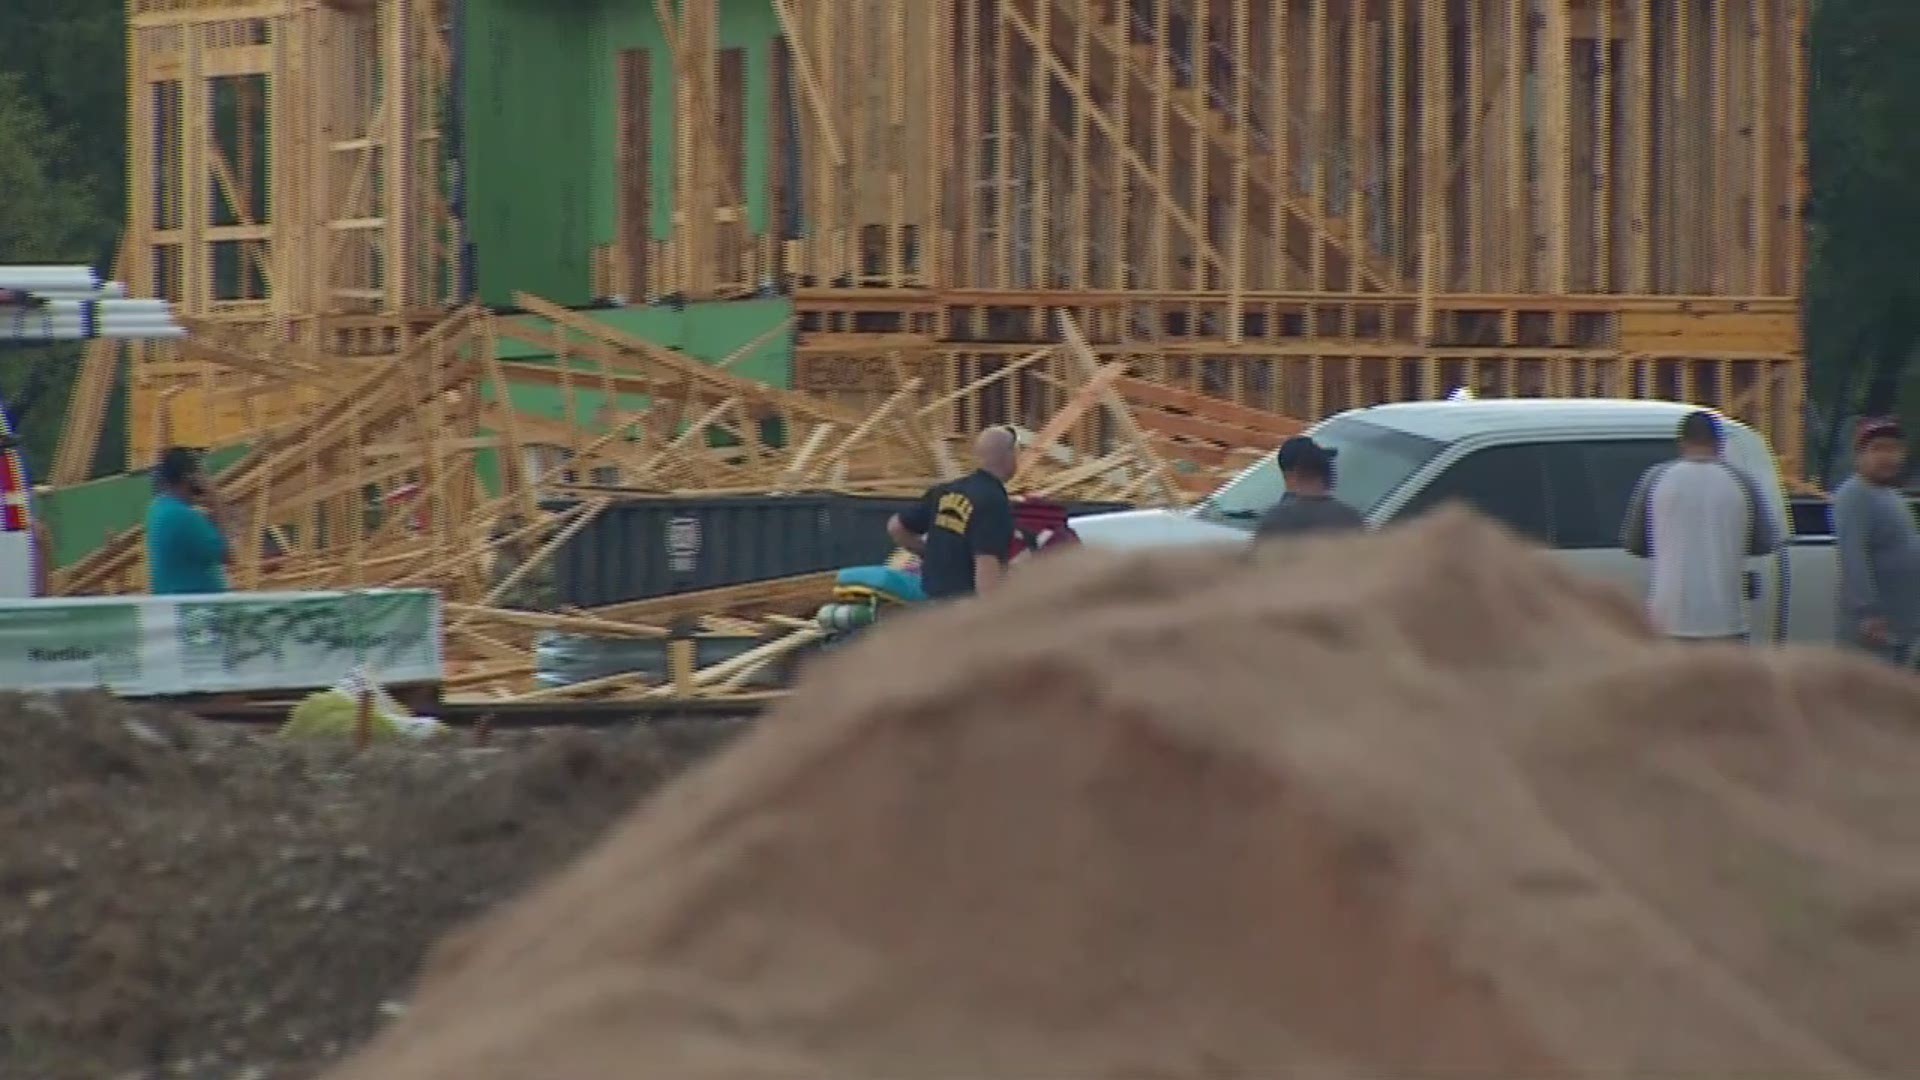 RAW VIDEO: Townhouse under construction collapses in West Dallas